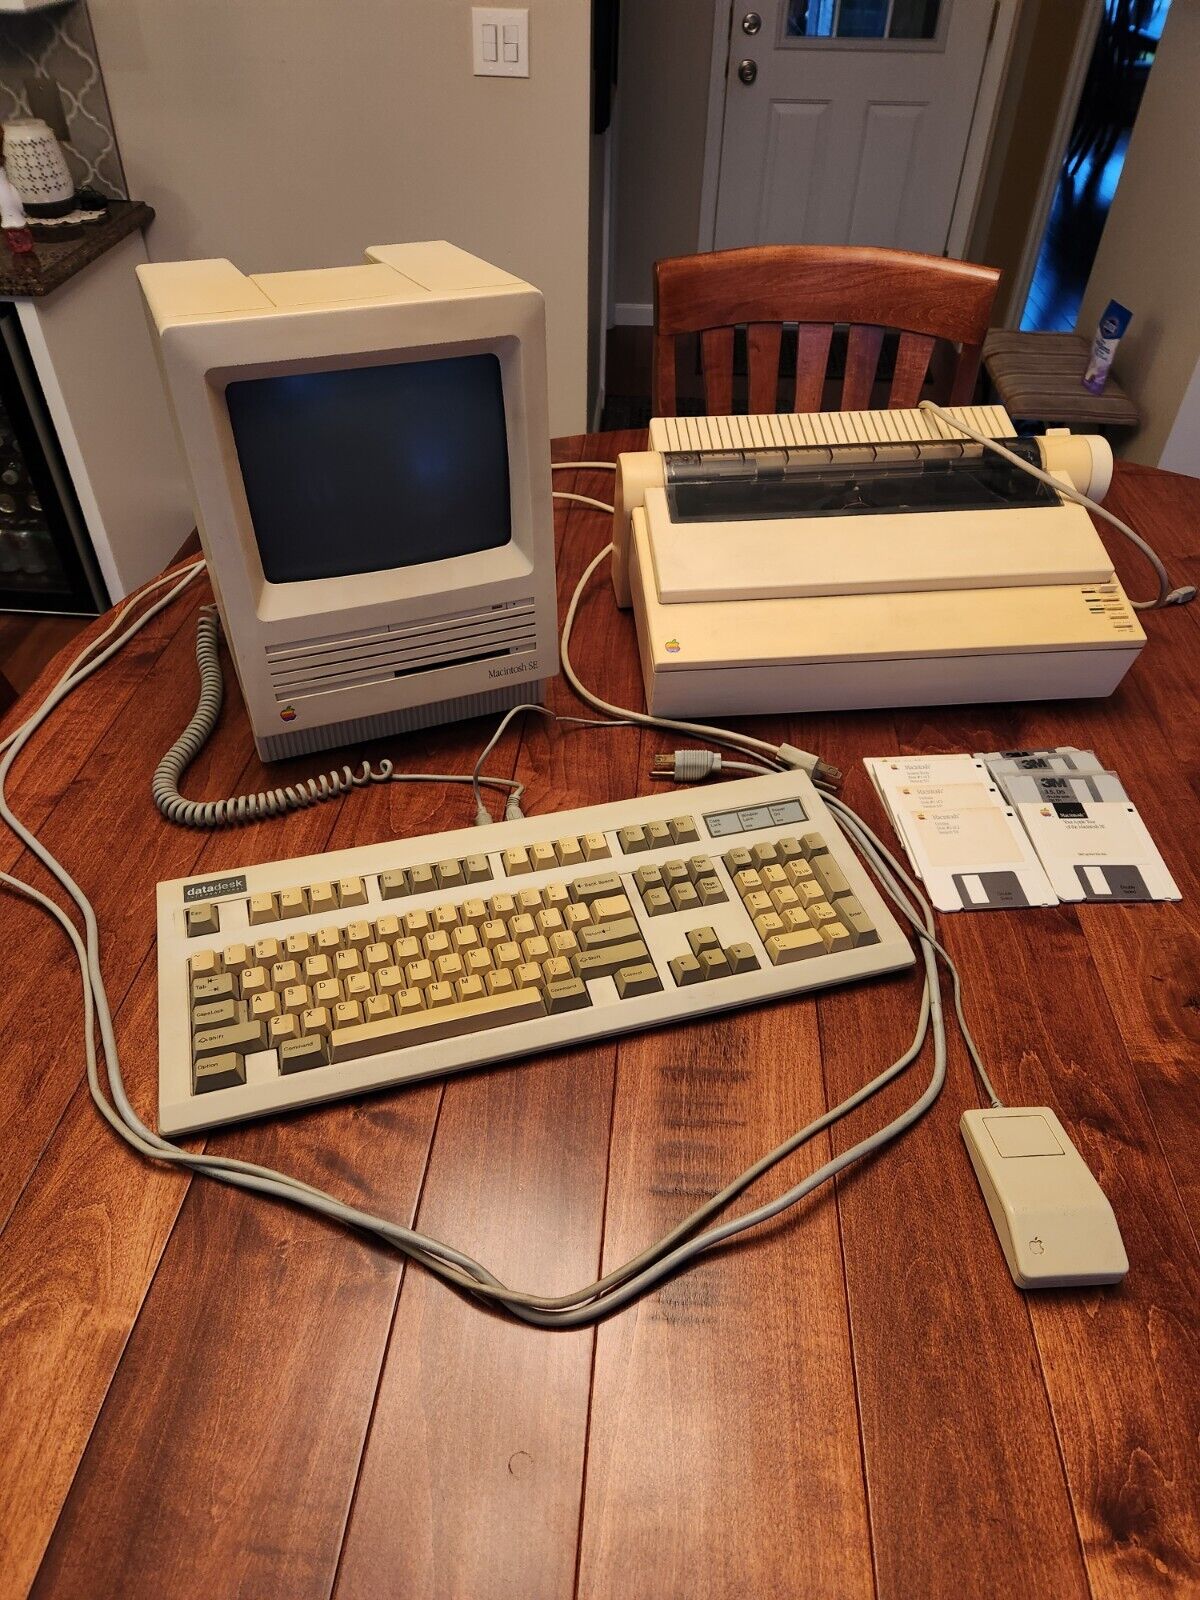 Apple Mac SE retro computer and accessories.  Works perfectly.